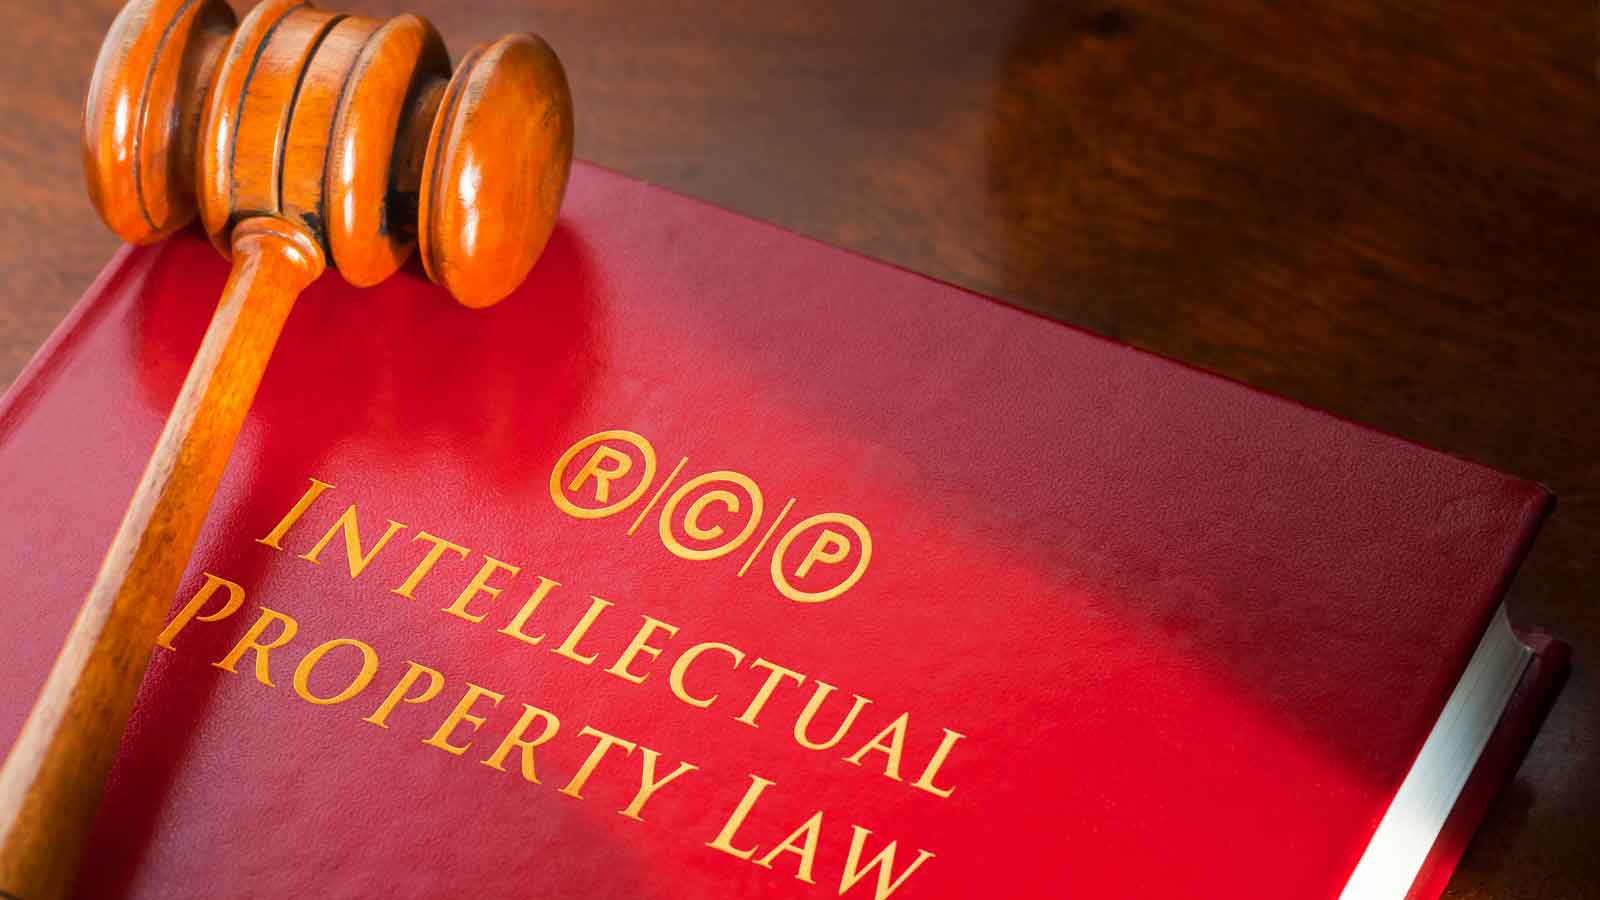 An image of a book about intellectual property and a gavel on top of it